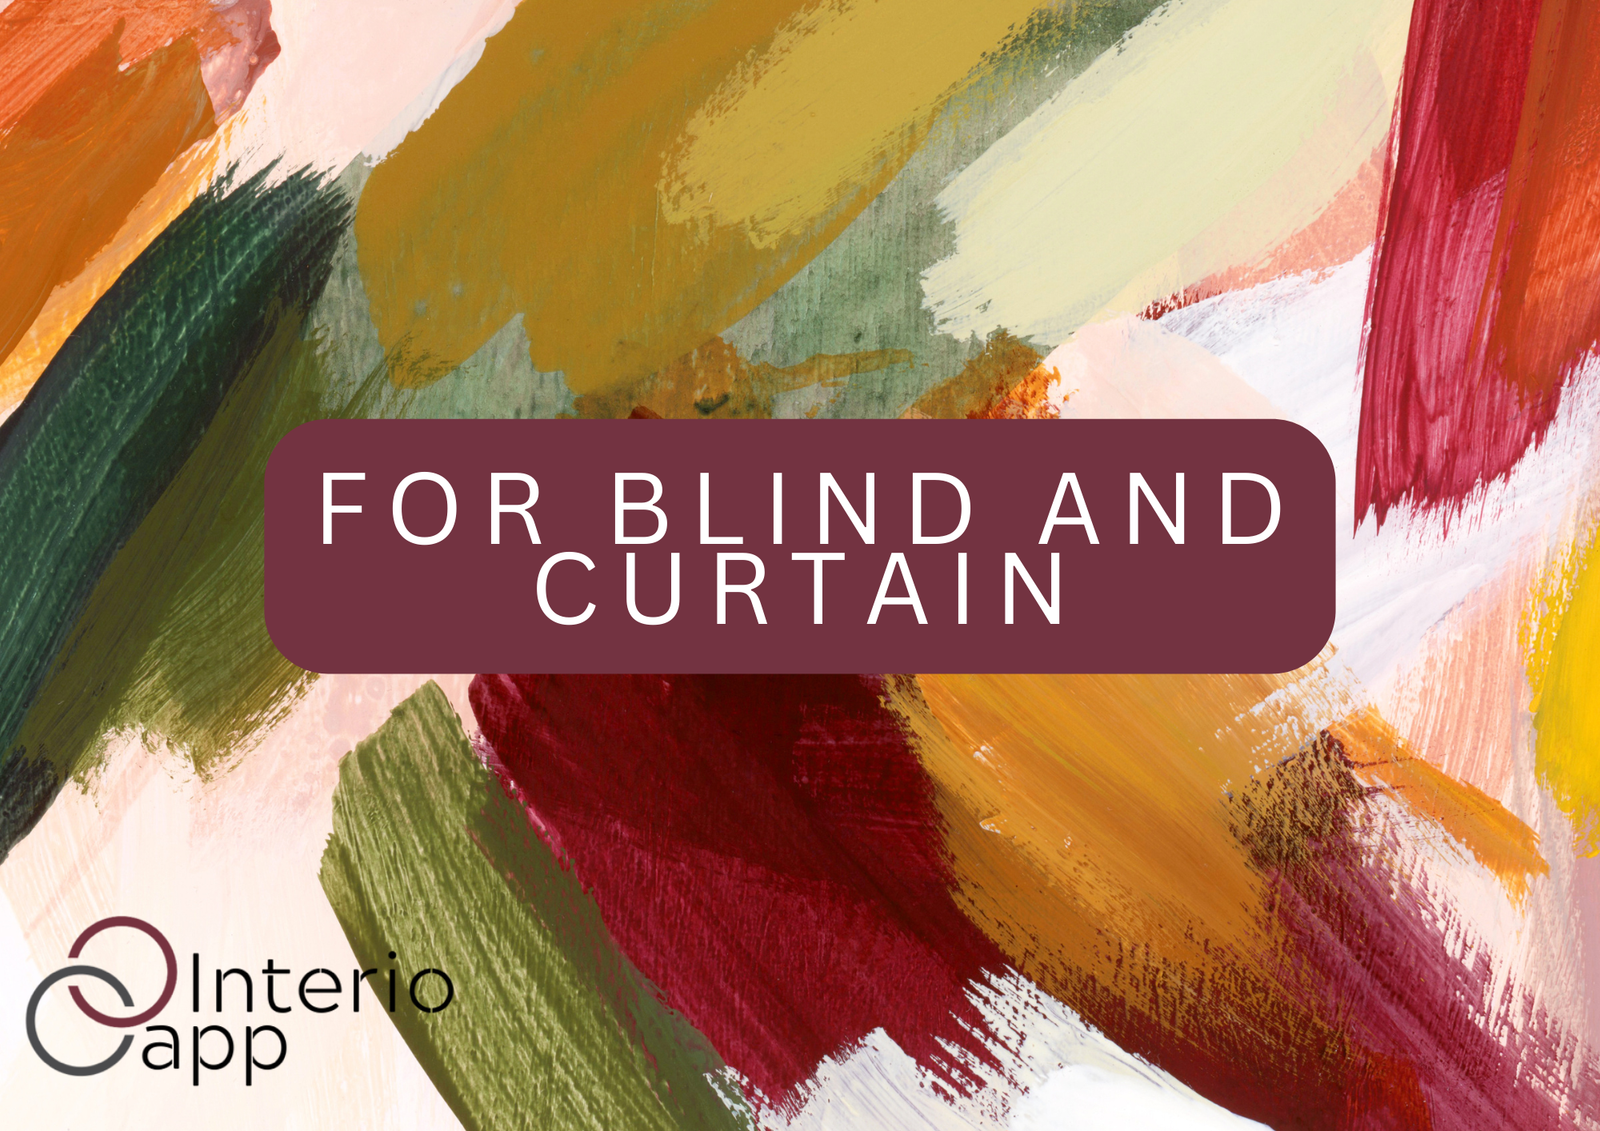 For blind and curtain retailers: InterioApp Quoting and E-commerce